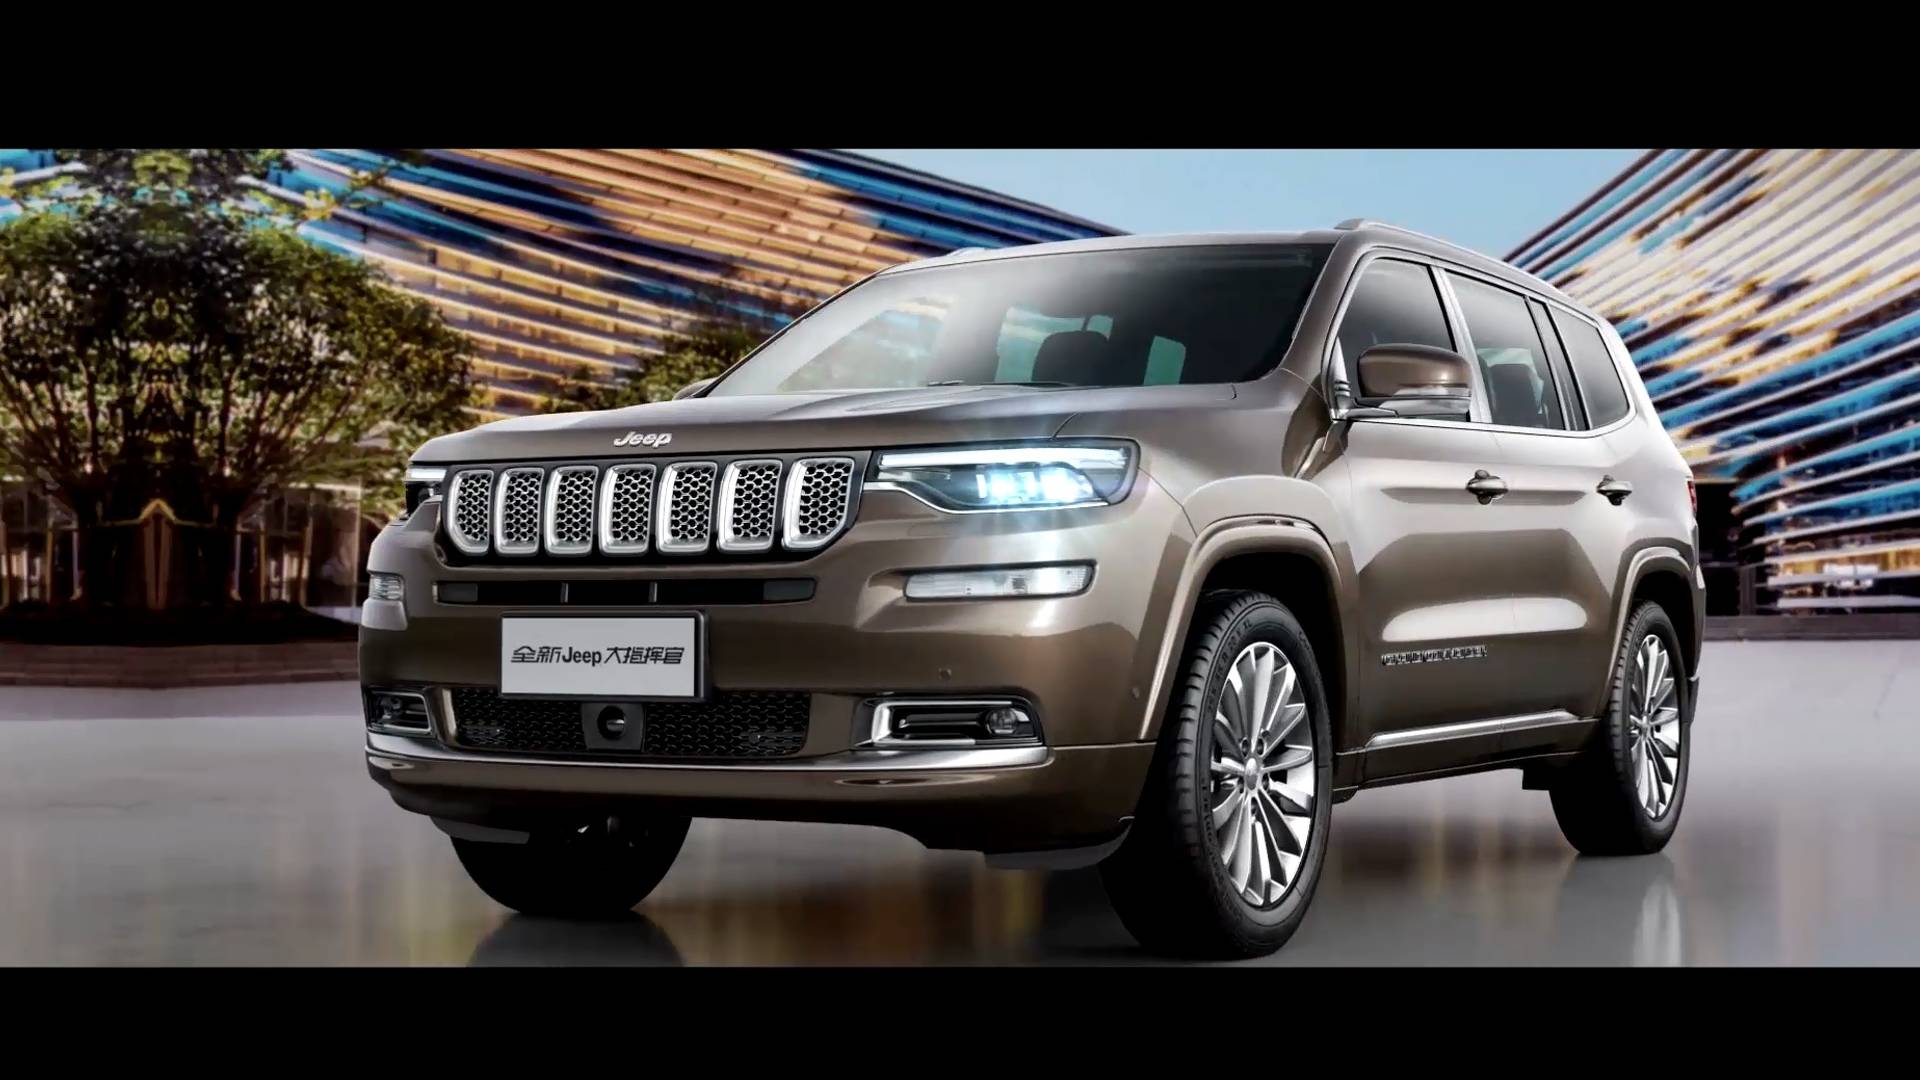 jeep-grand-commander-for-china.jpg